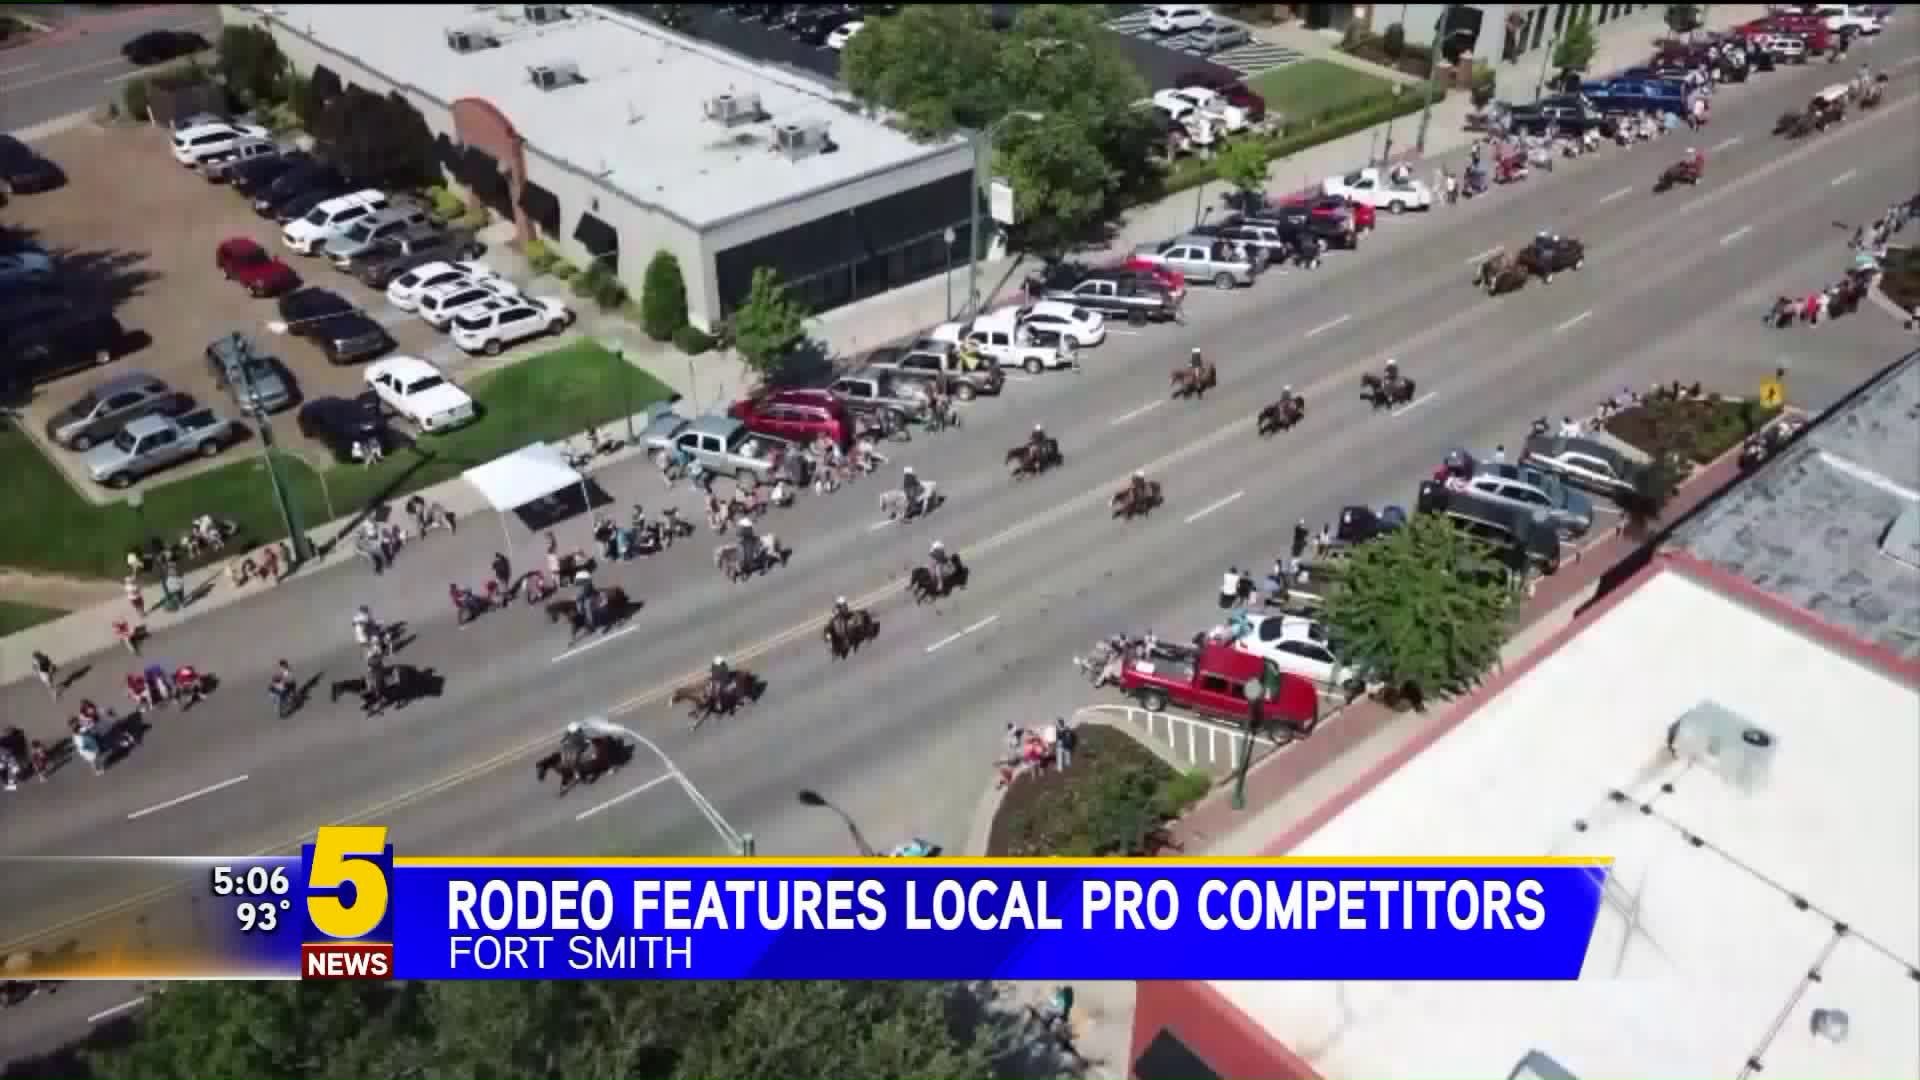 Rodeo Features Local Pro Competitors